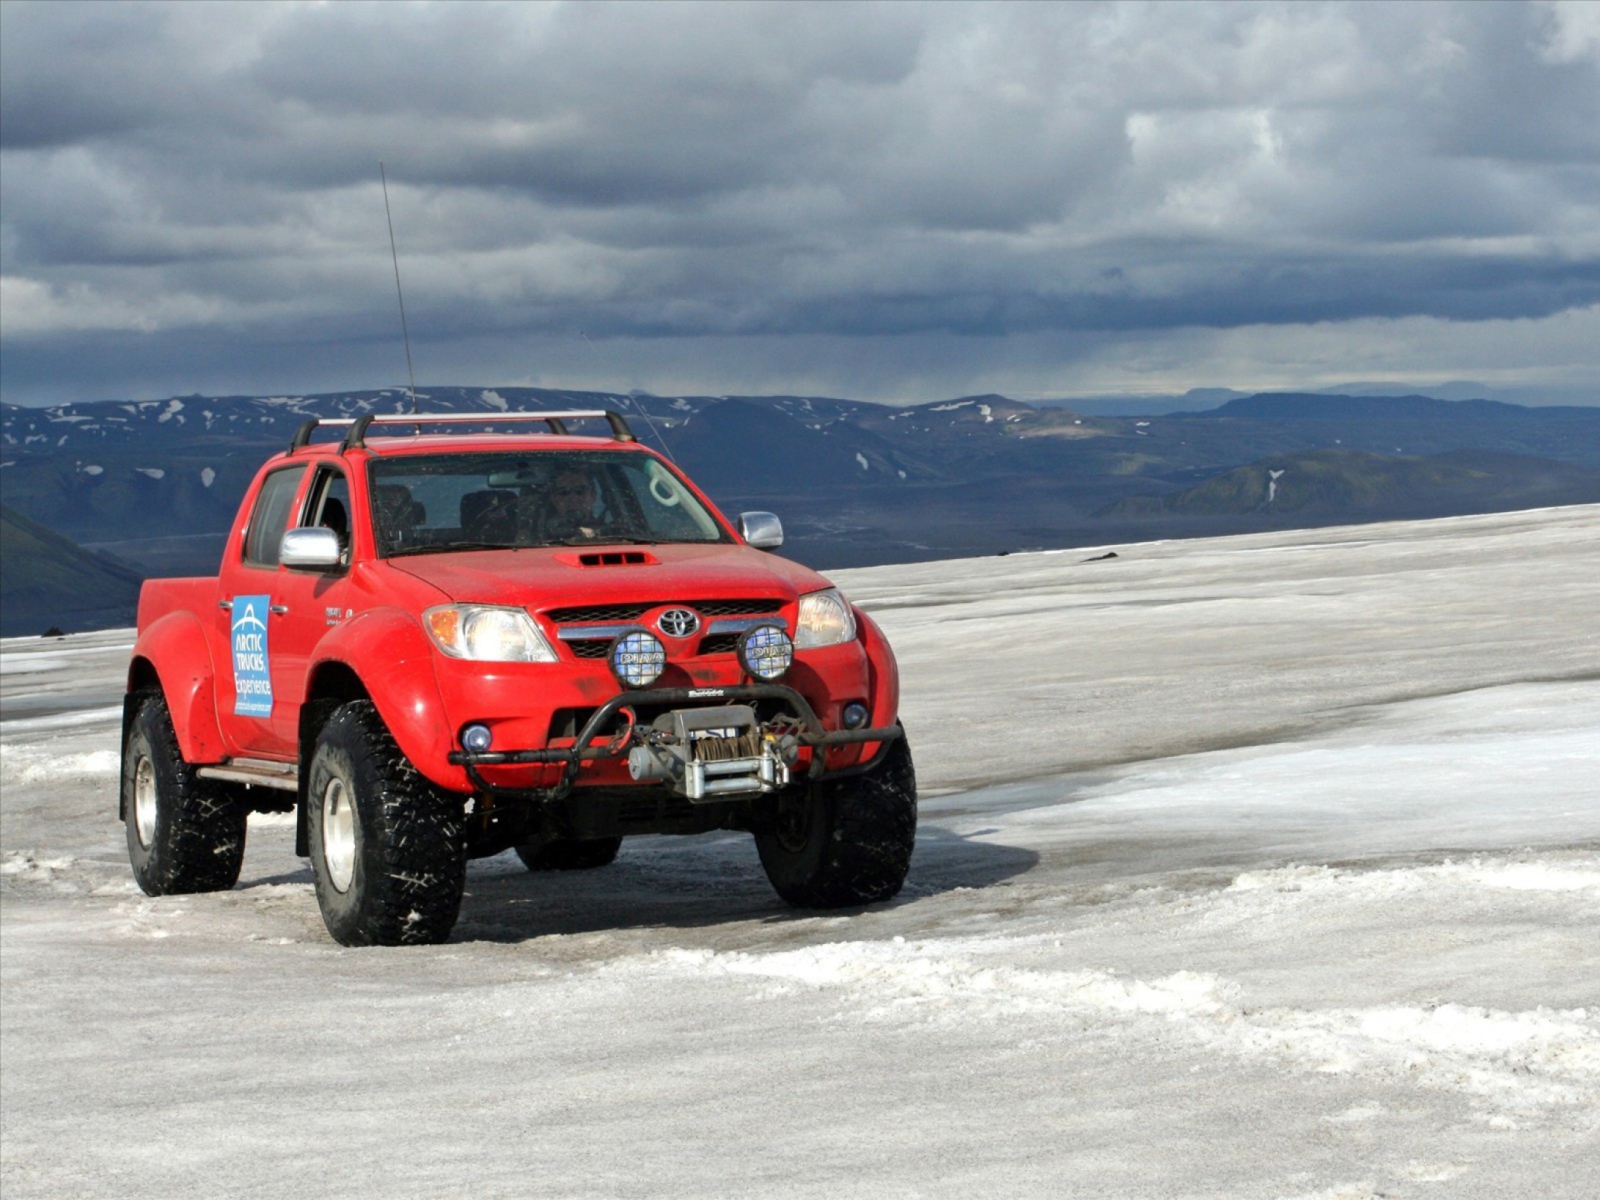 Toyota Hilux Tuning wallpaper 1600x1200